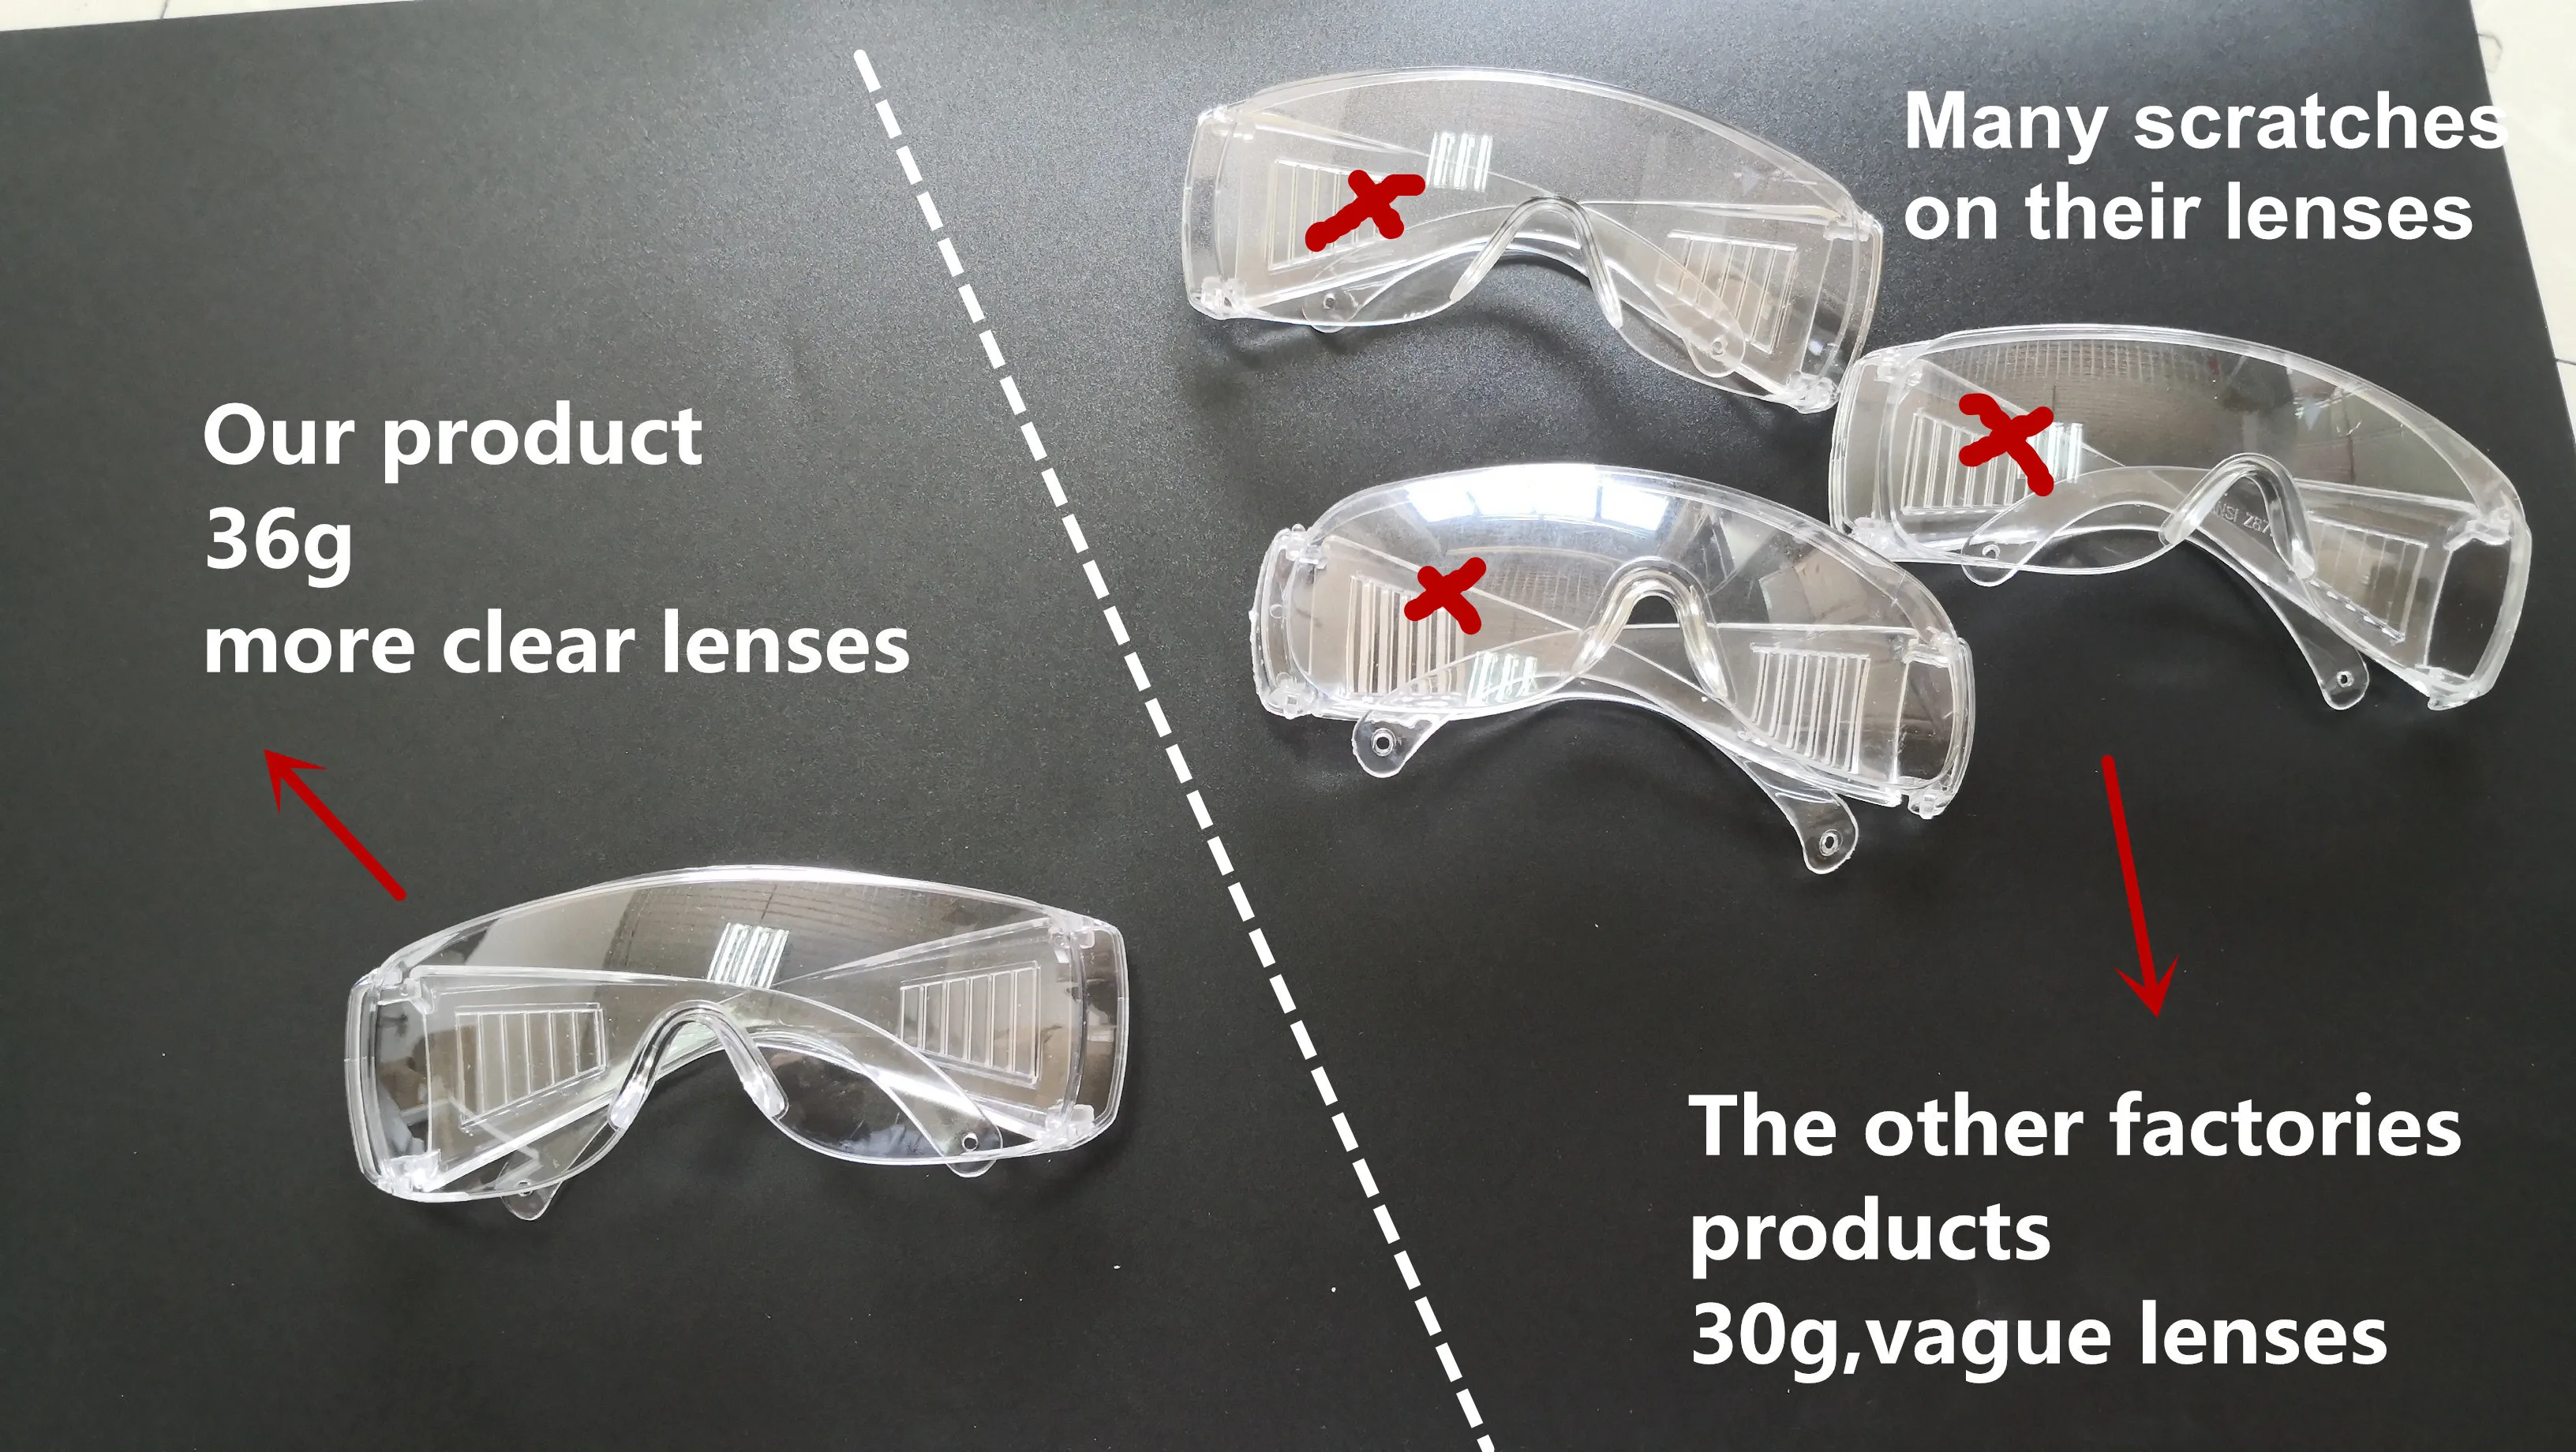 
Sand-proof dust-proof Transparent blinds anti-impact Safety glasses 